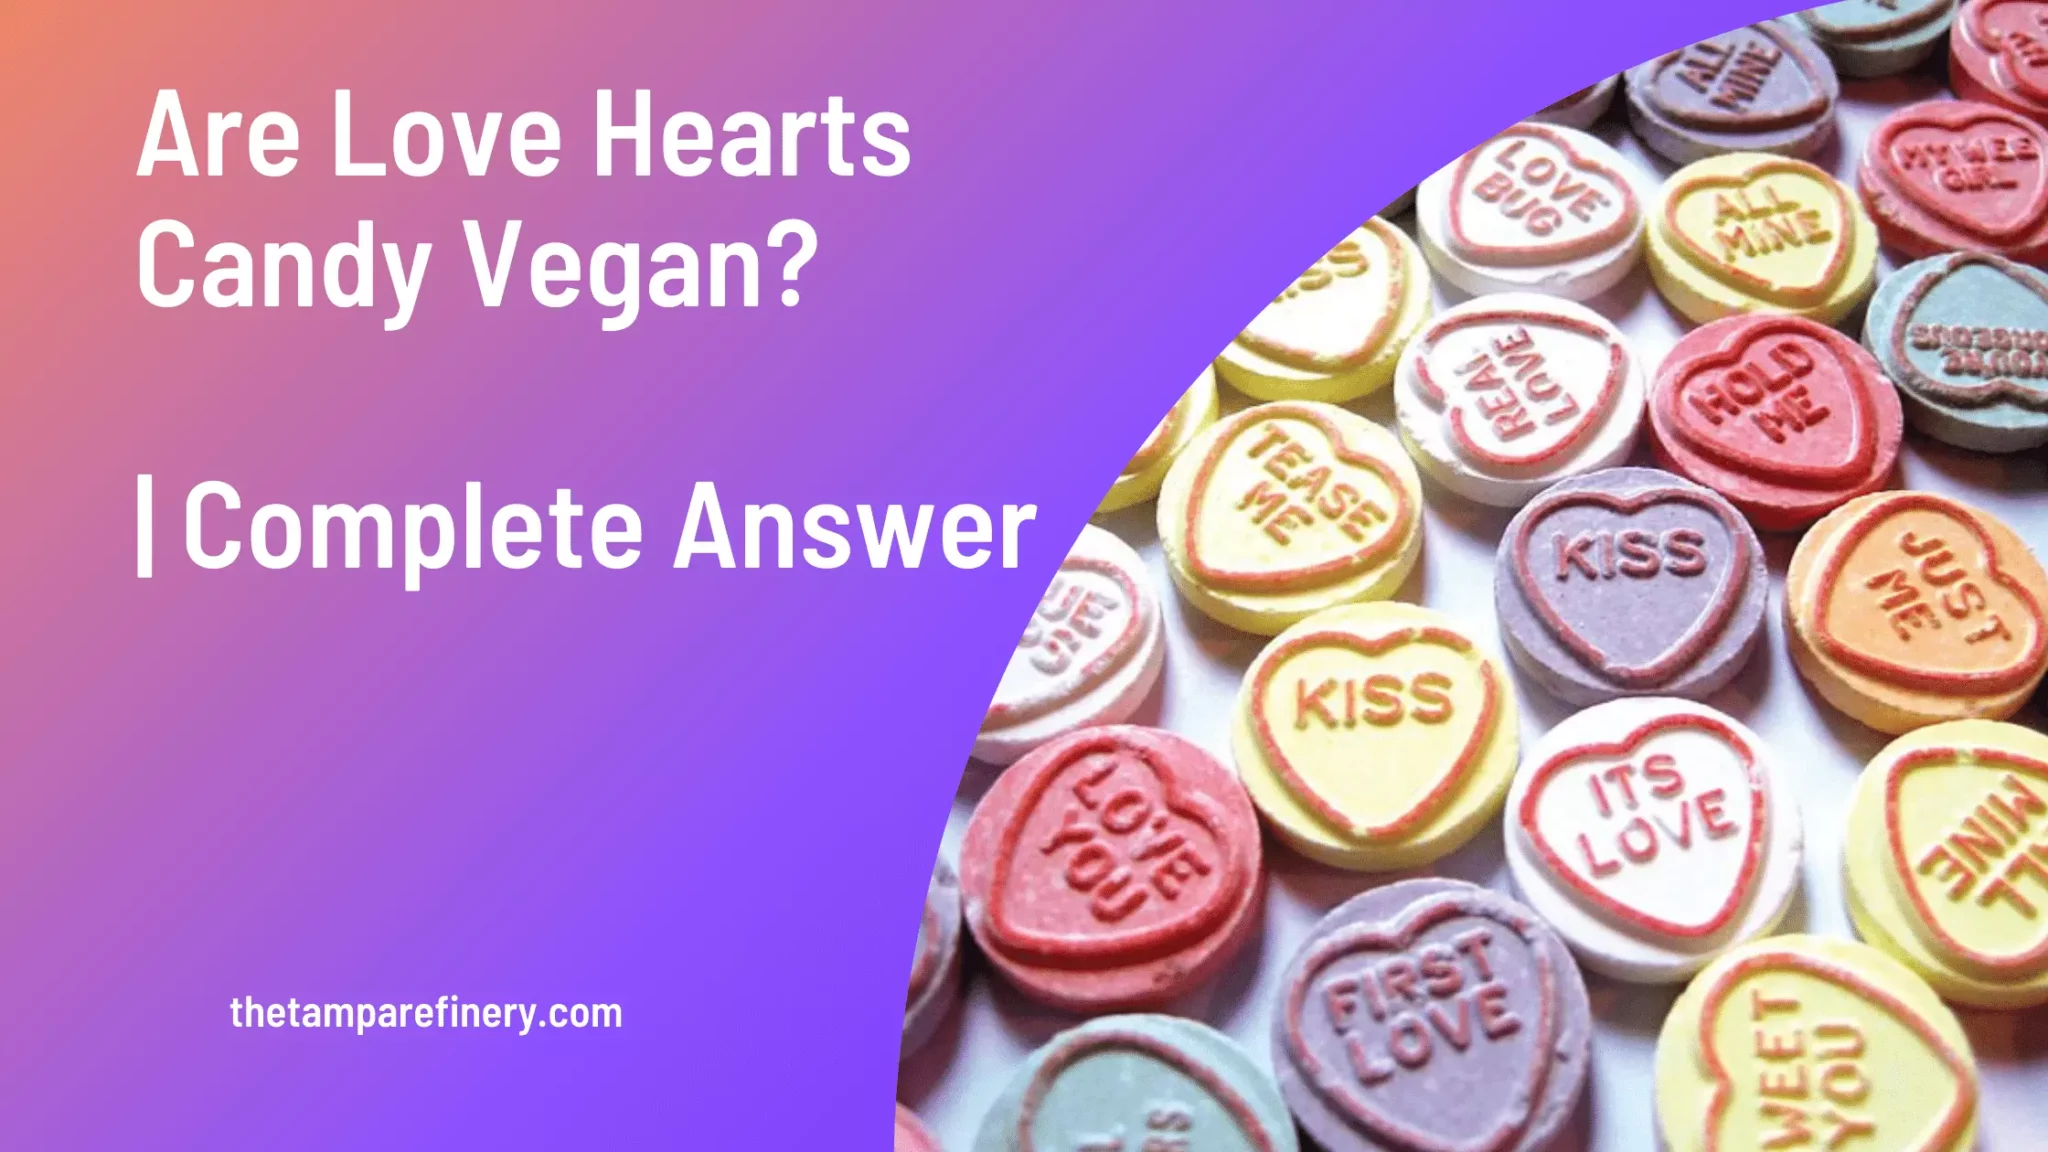 Are Love Hearts Candy Vegan